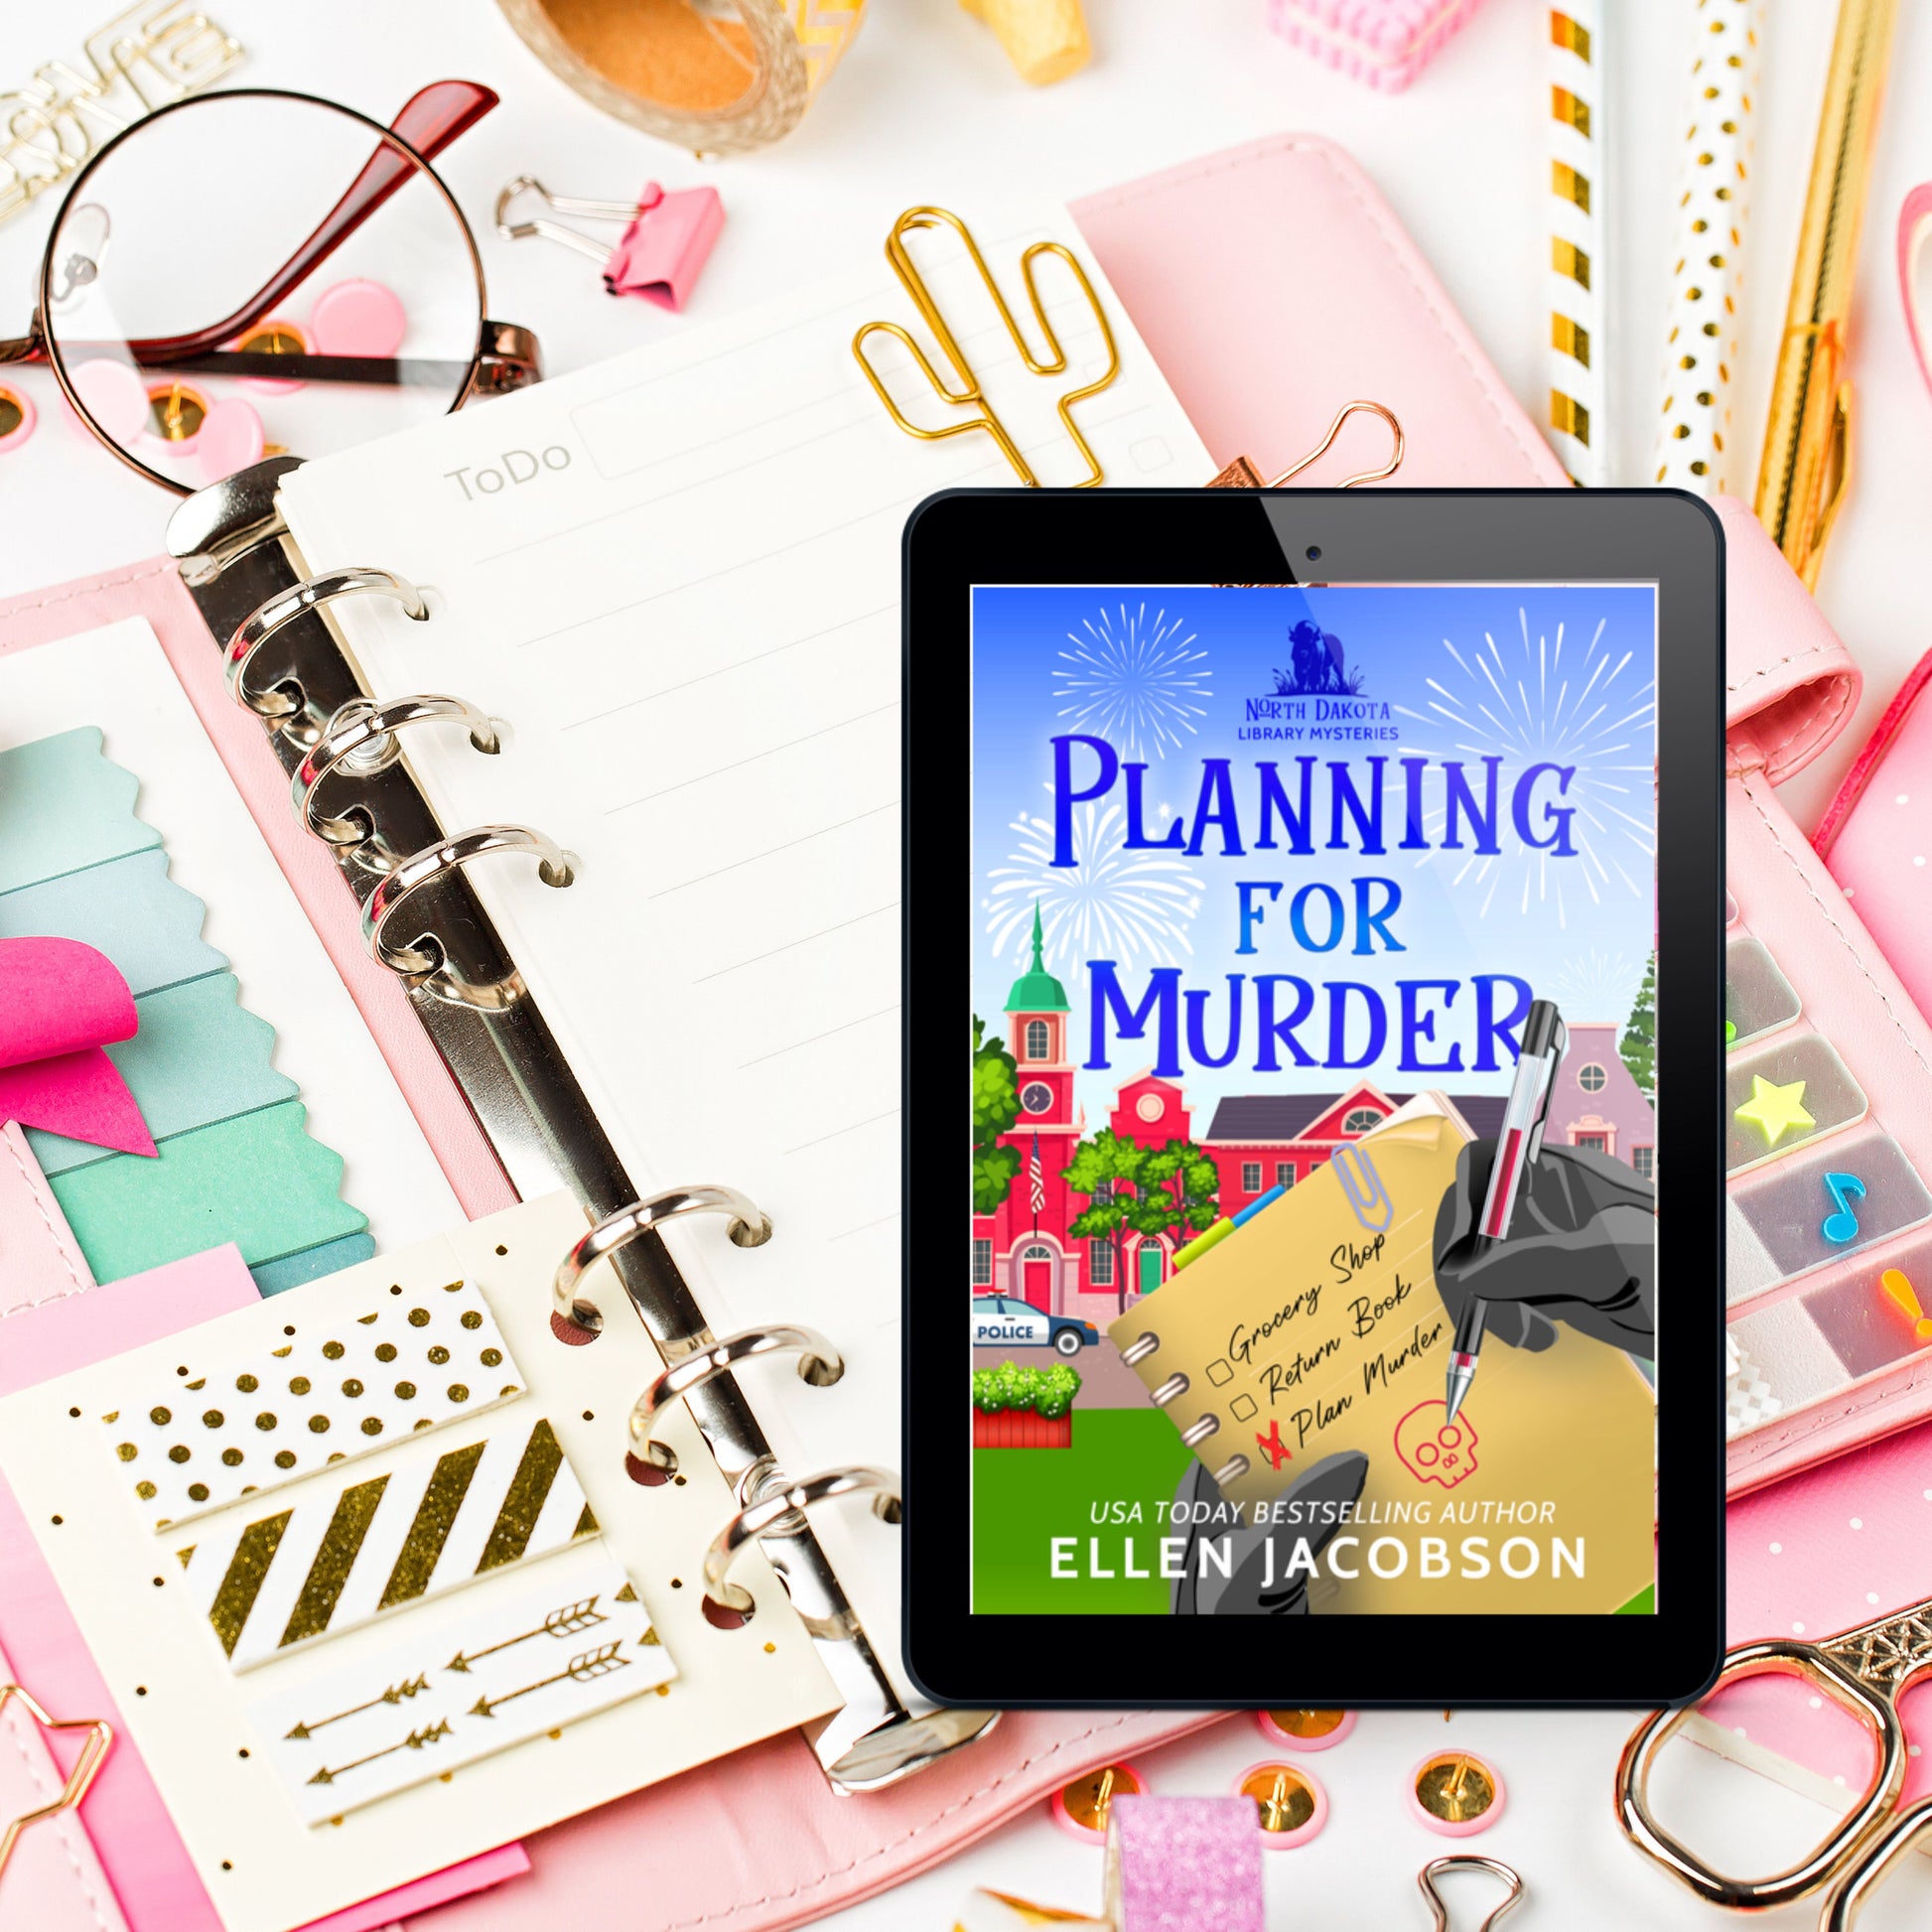 Planning for Murder ebook cover with stationery supplies